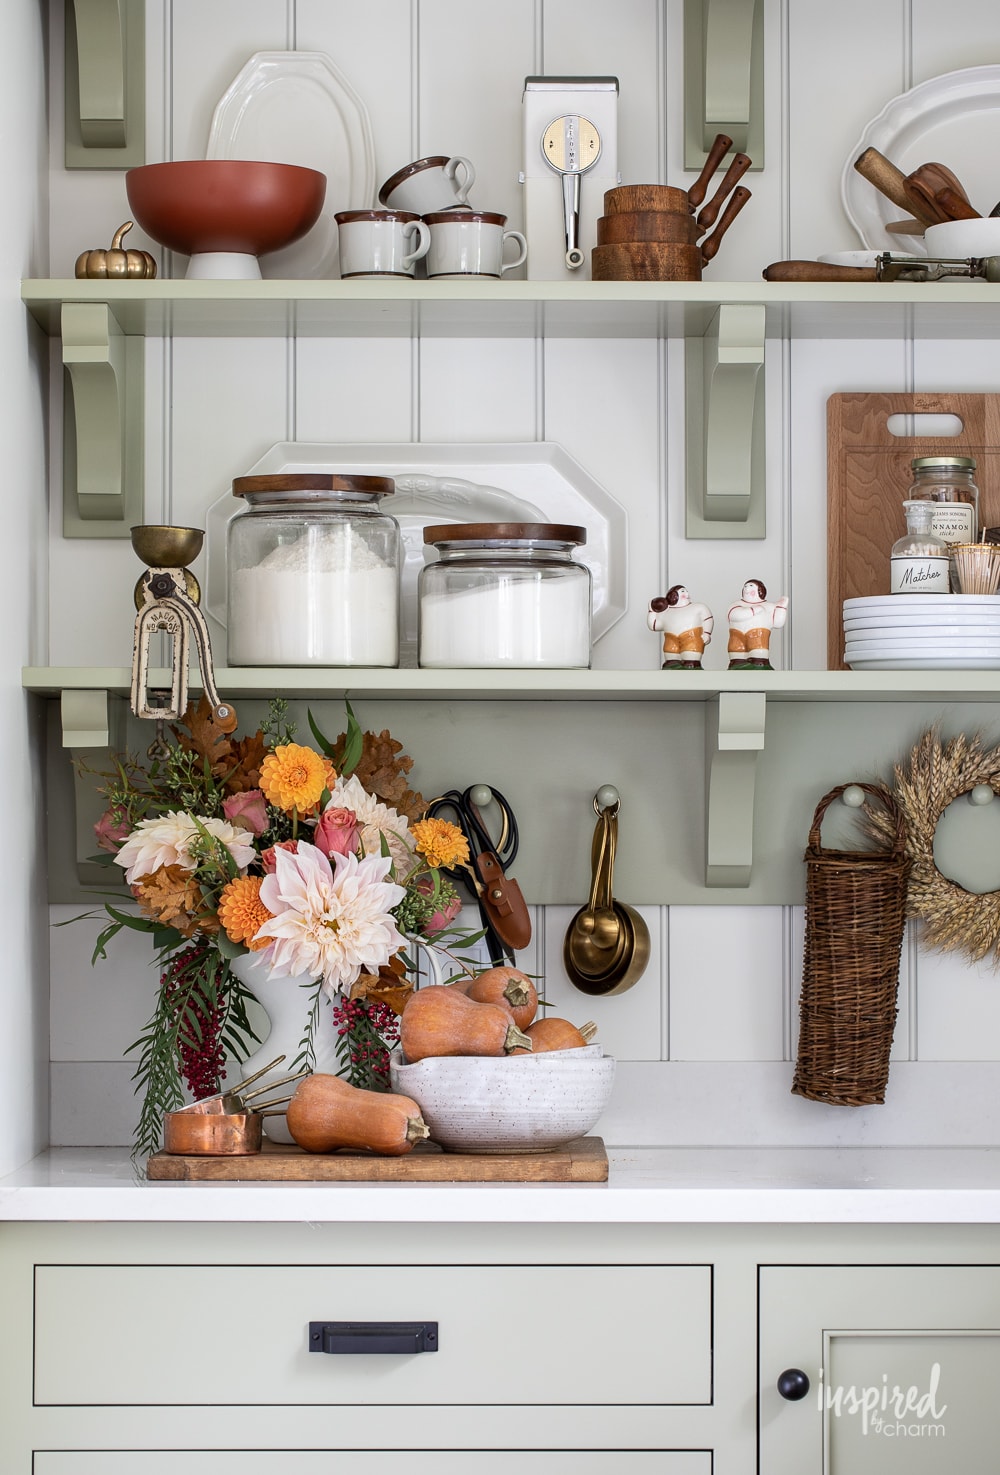 pantry shelves paint Sherwin-Williams sage decorated for fall.